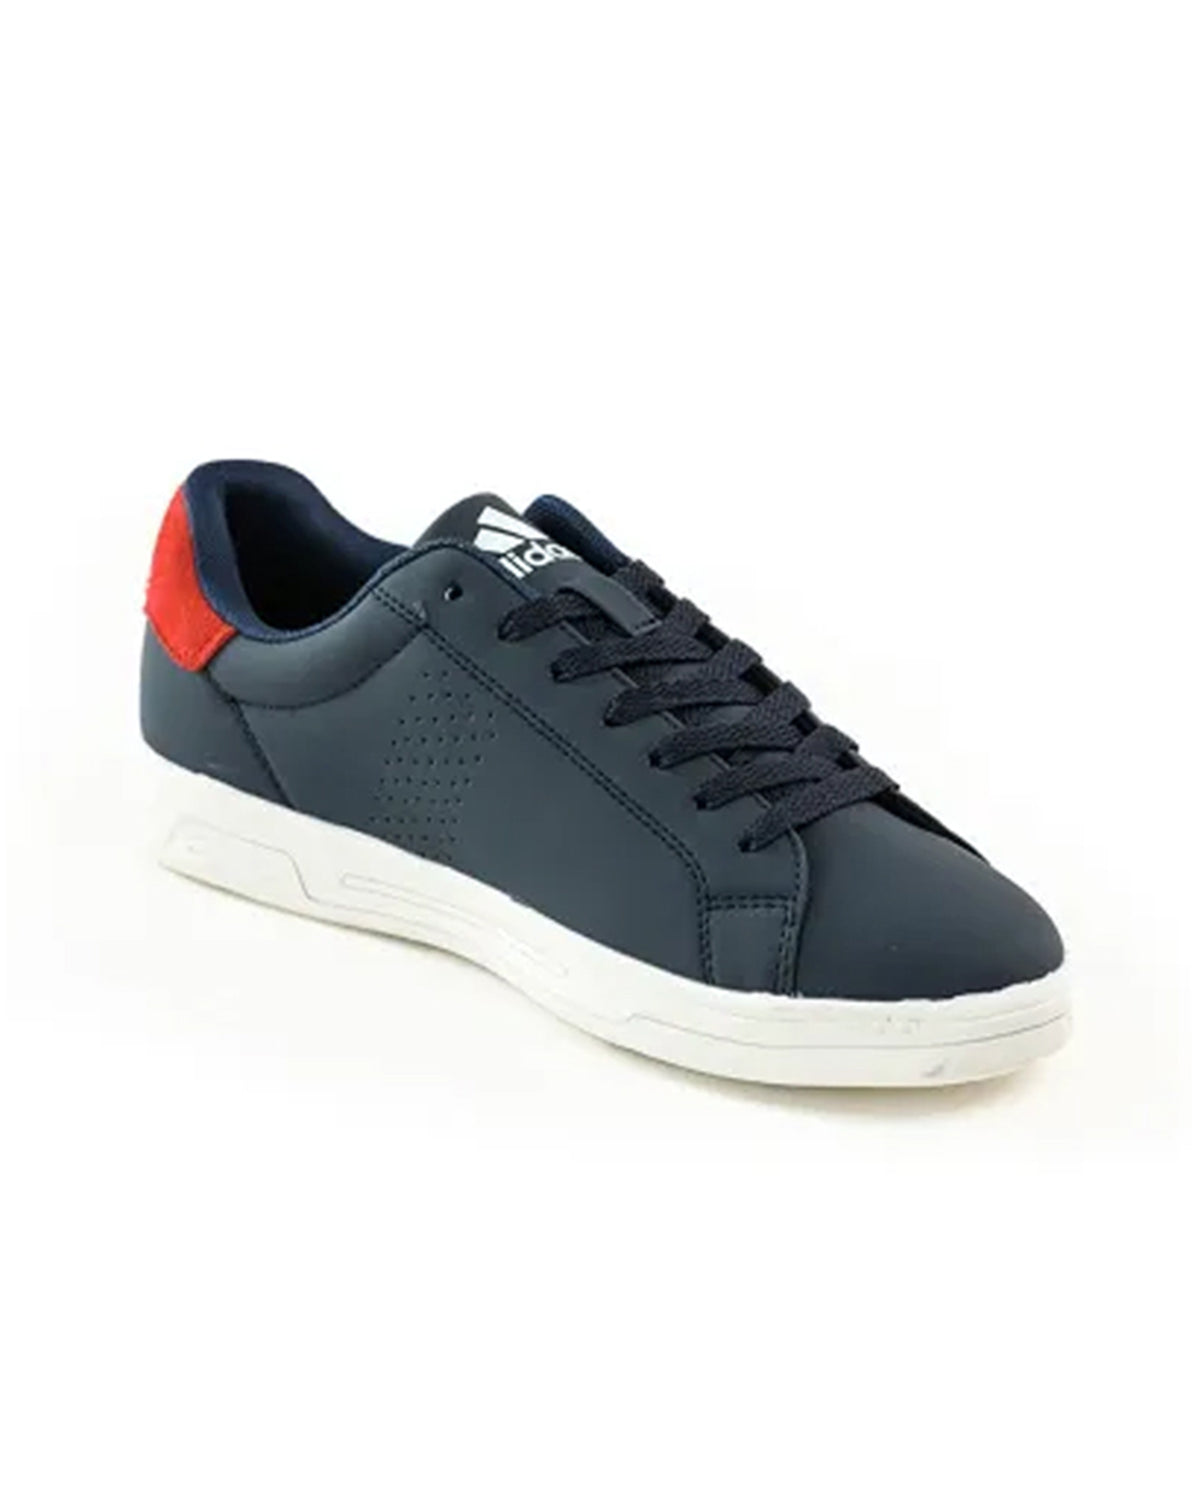 Men's Branded Sports Shoes